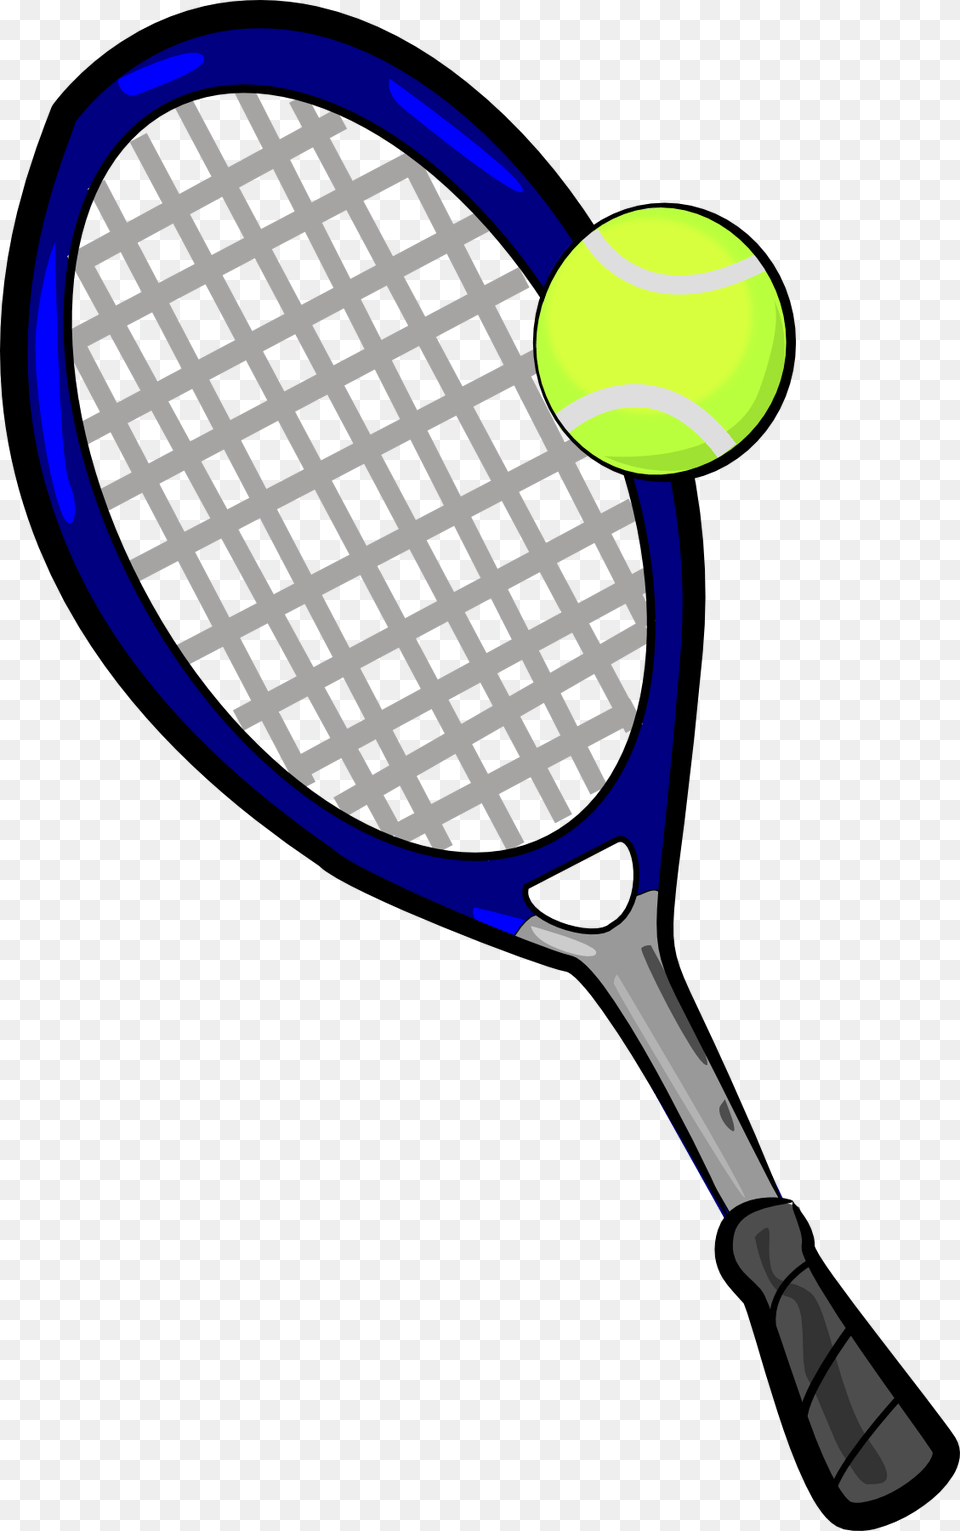 Court At Getdrawings Com For Personal Tennis Racket And Ball Clip Art, Sport, Tennis Ball, Tennis Racket, Smoke Pipe Free Transparent Png